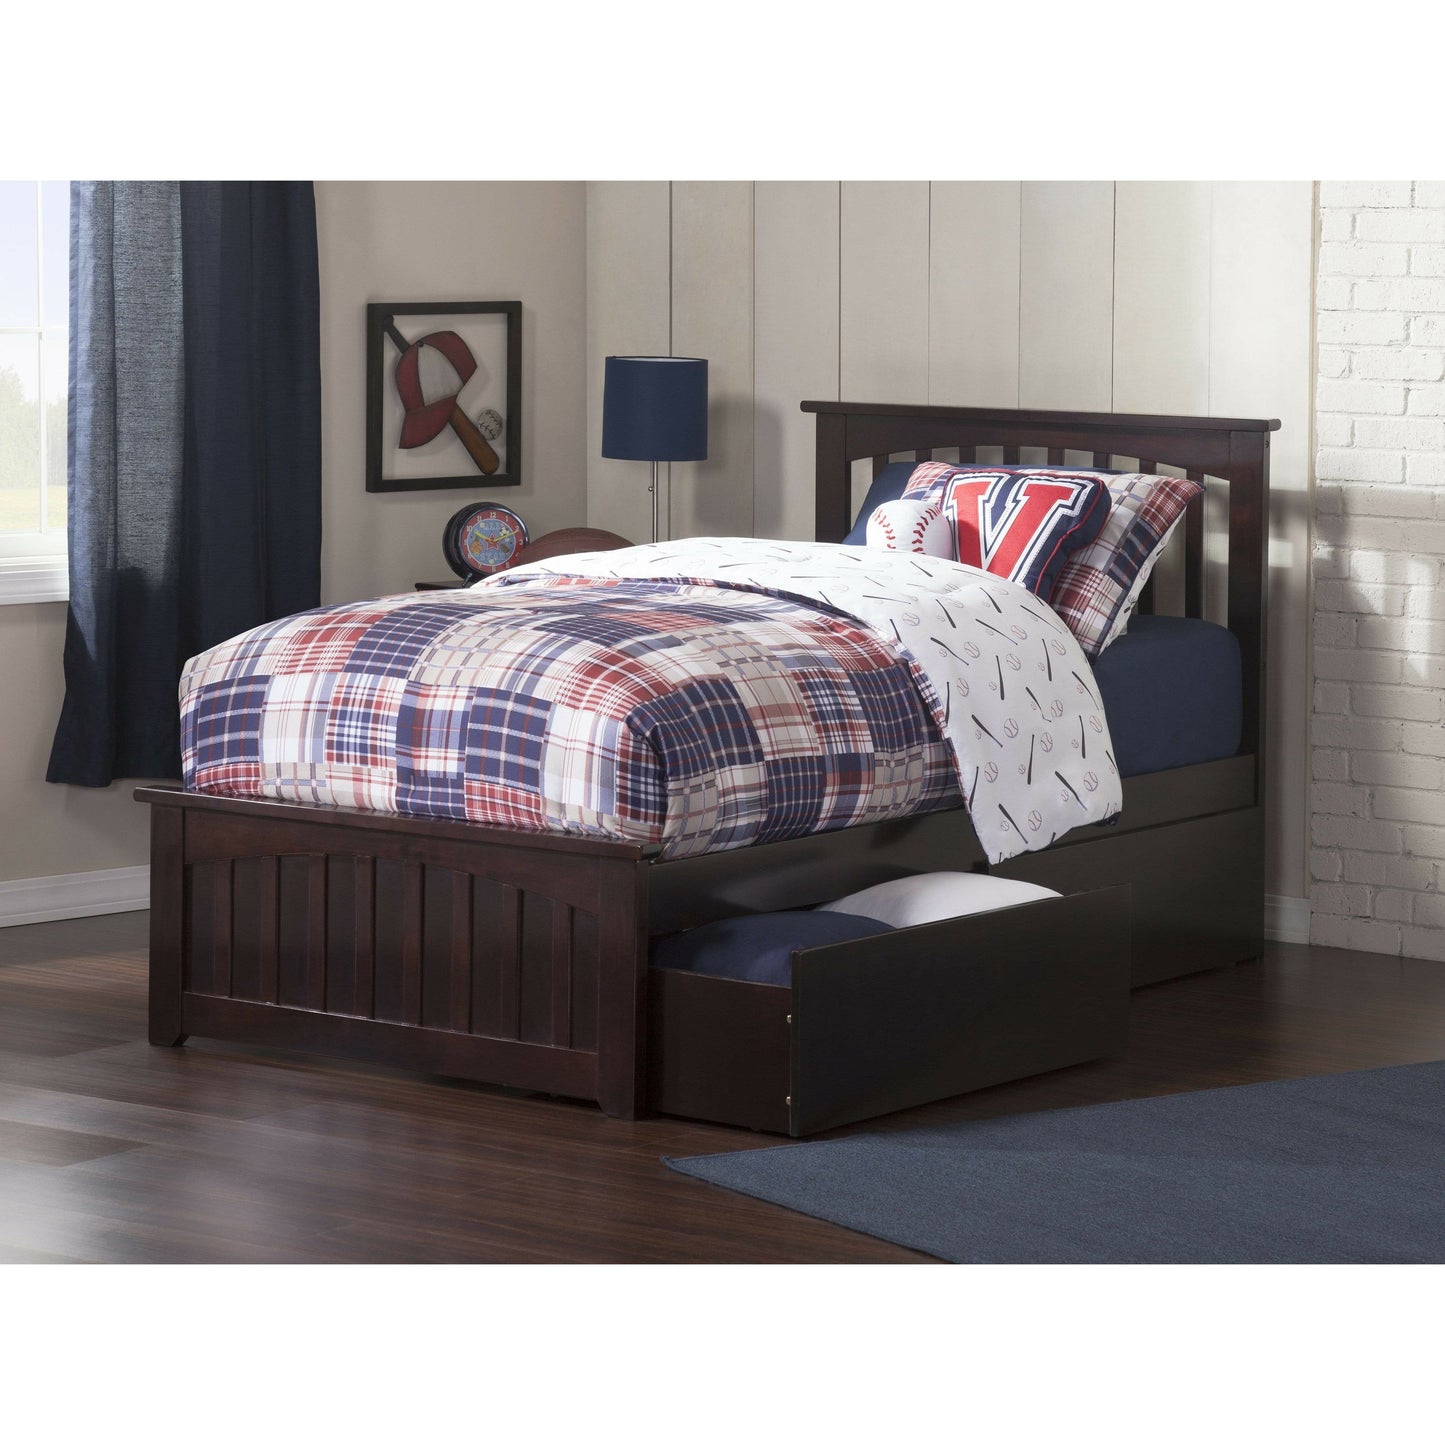 Atlantic Furniture Bed Espresso Mission Twin XL Platform Bed with Matching Foot Board with 2 Urban Bed Drawers in White